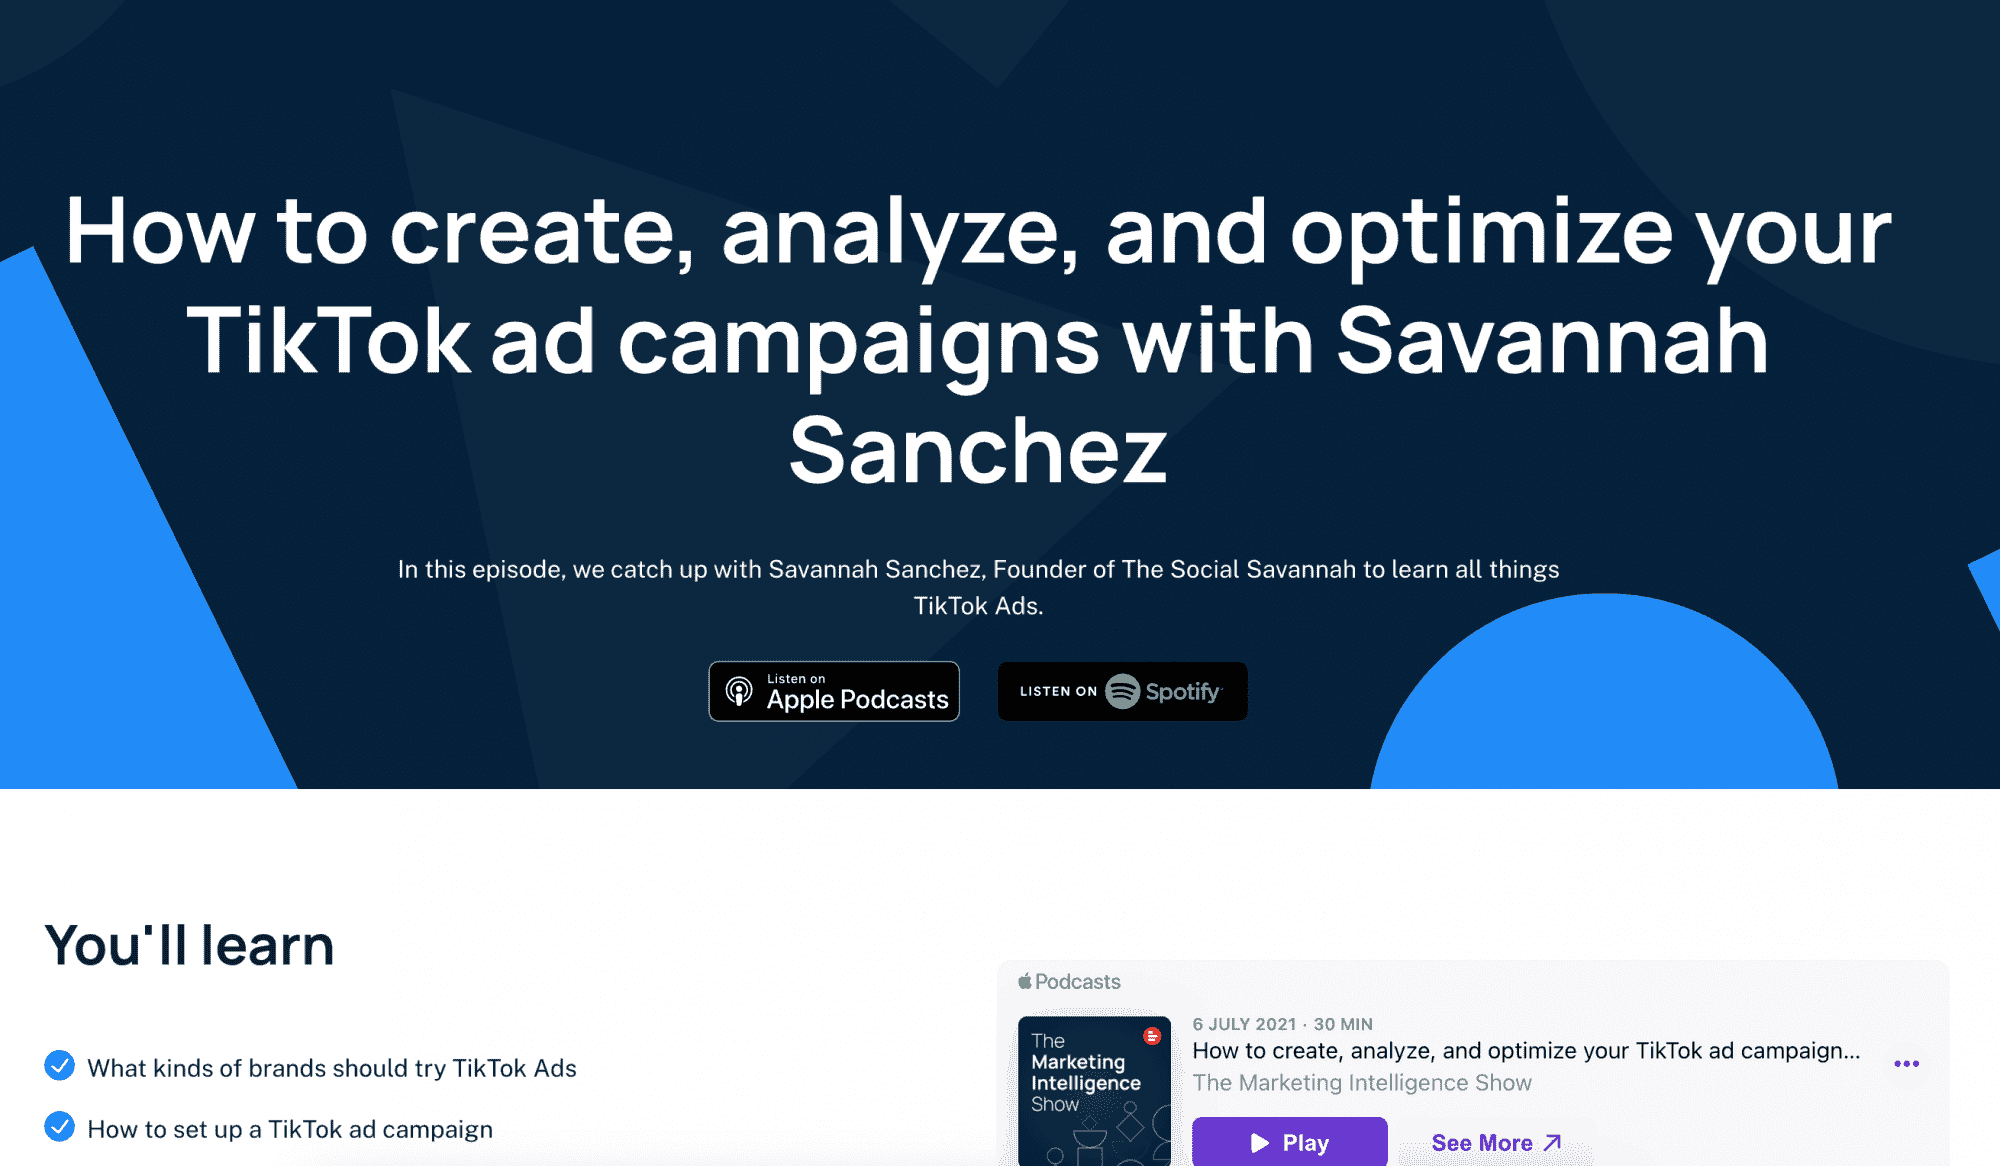 How to create, analyze, and optimize your TikTok ad campaigns